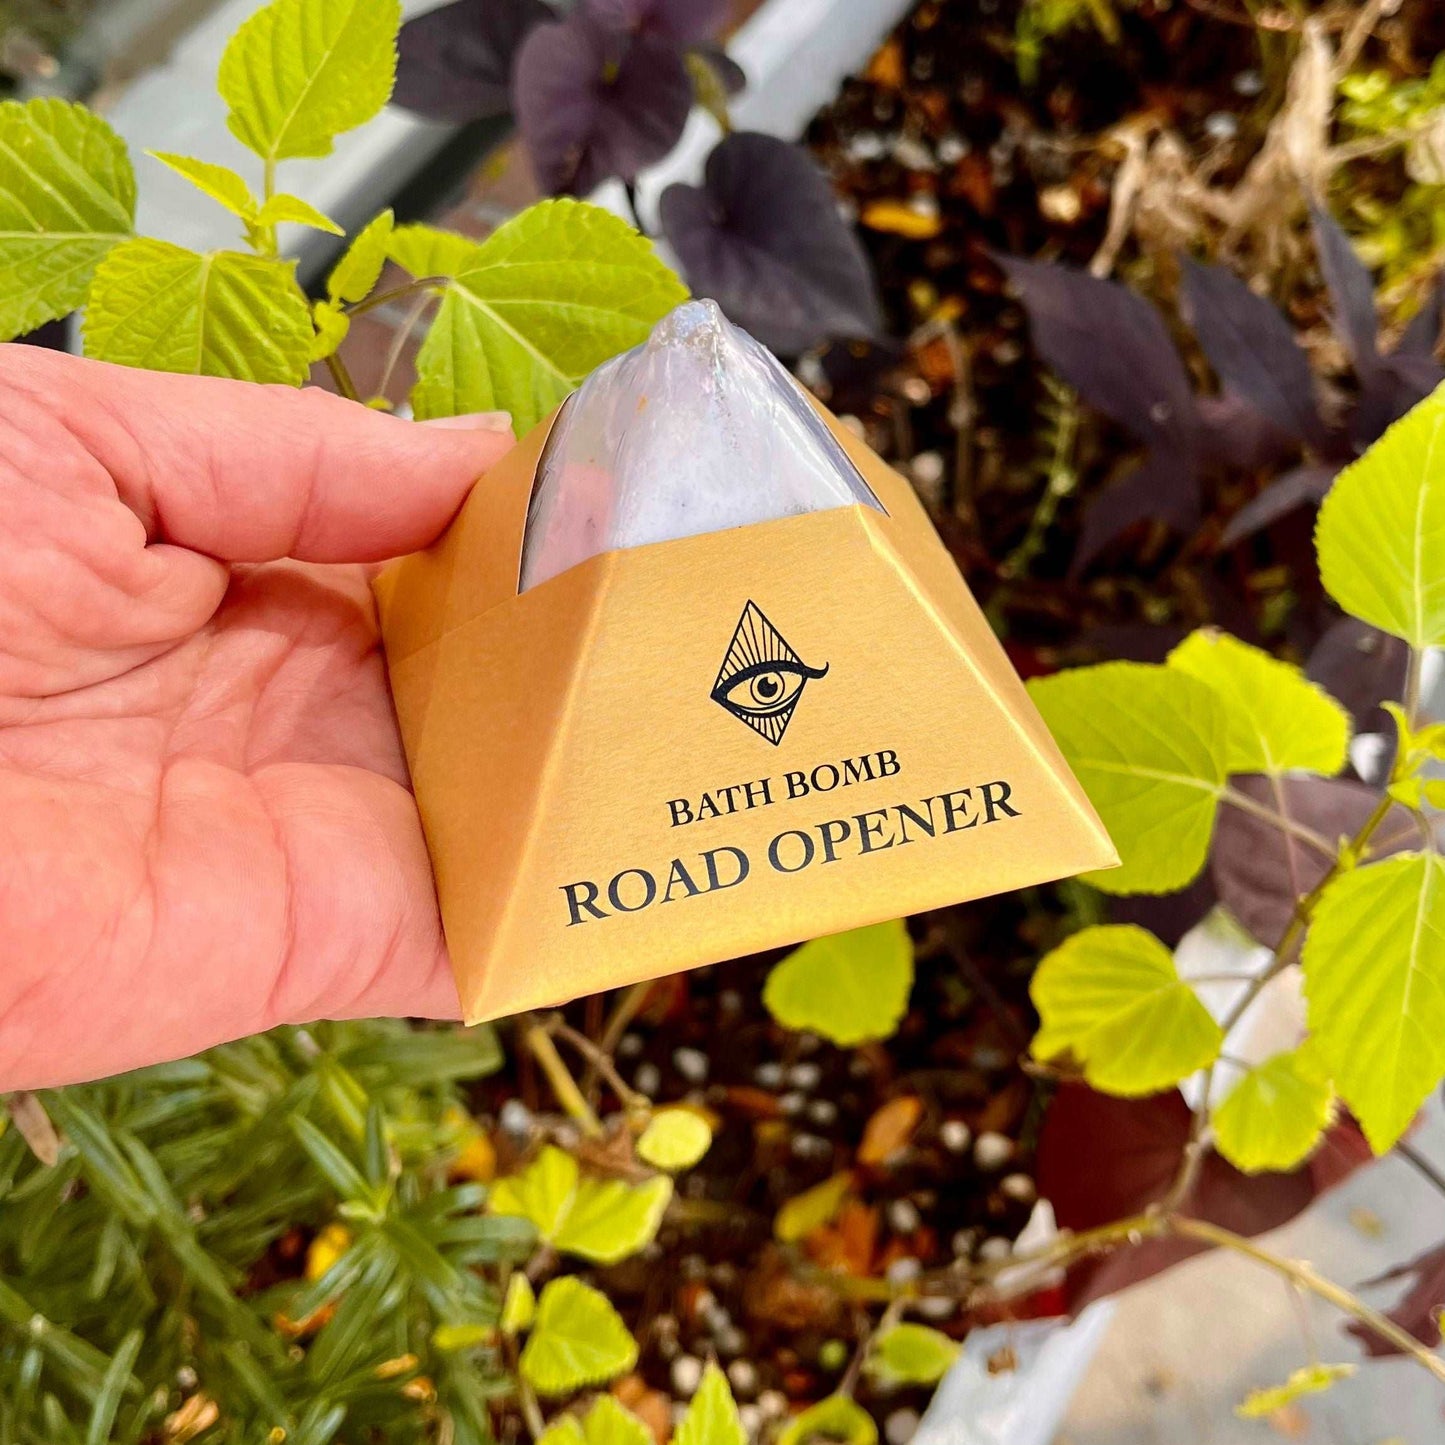 Open new paths and possibilities with our Road Opener Bath Bomb. Crafted with organic essential oils of Lemongrass, Basil, and Peppermint, this bath bomb is designed to usher in positive energy and clarity. Immerse yourself in the refreshing scents, allowing them to inspire a sense of openness and renewal. Luxuriate in the soothing waters and embrace the potential for a clear and invigorated mindset.